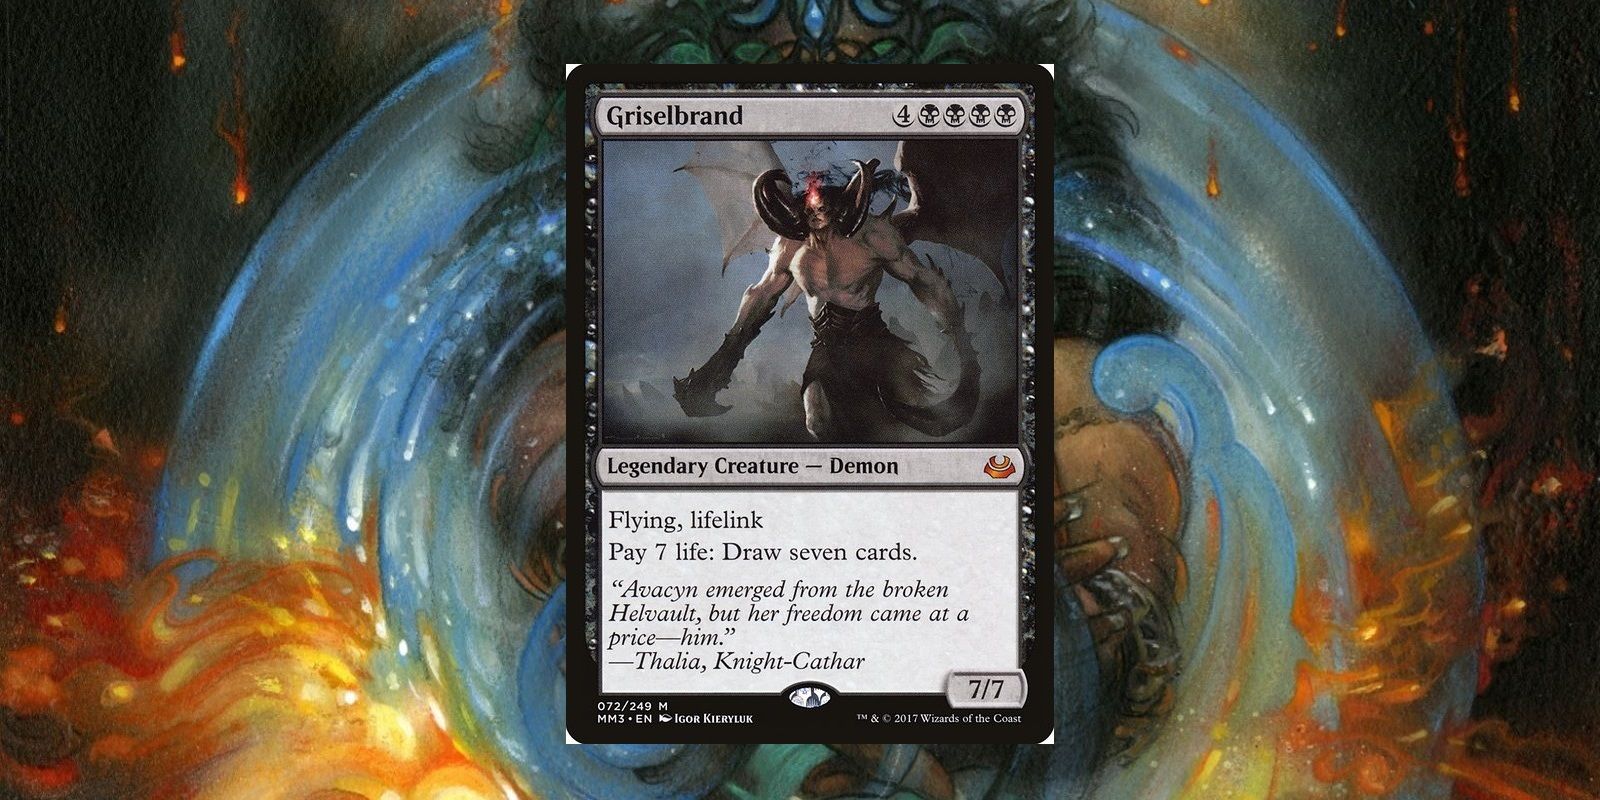 Griselbrand the legendary demon card in magic the gathering